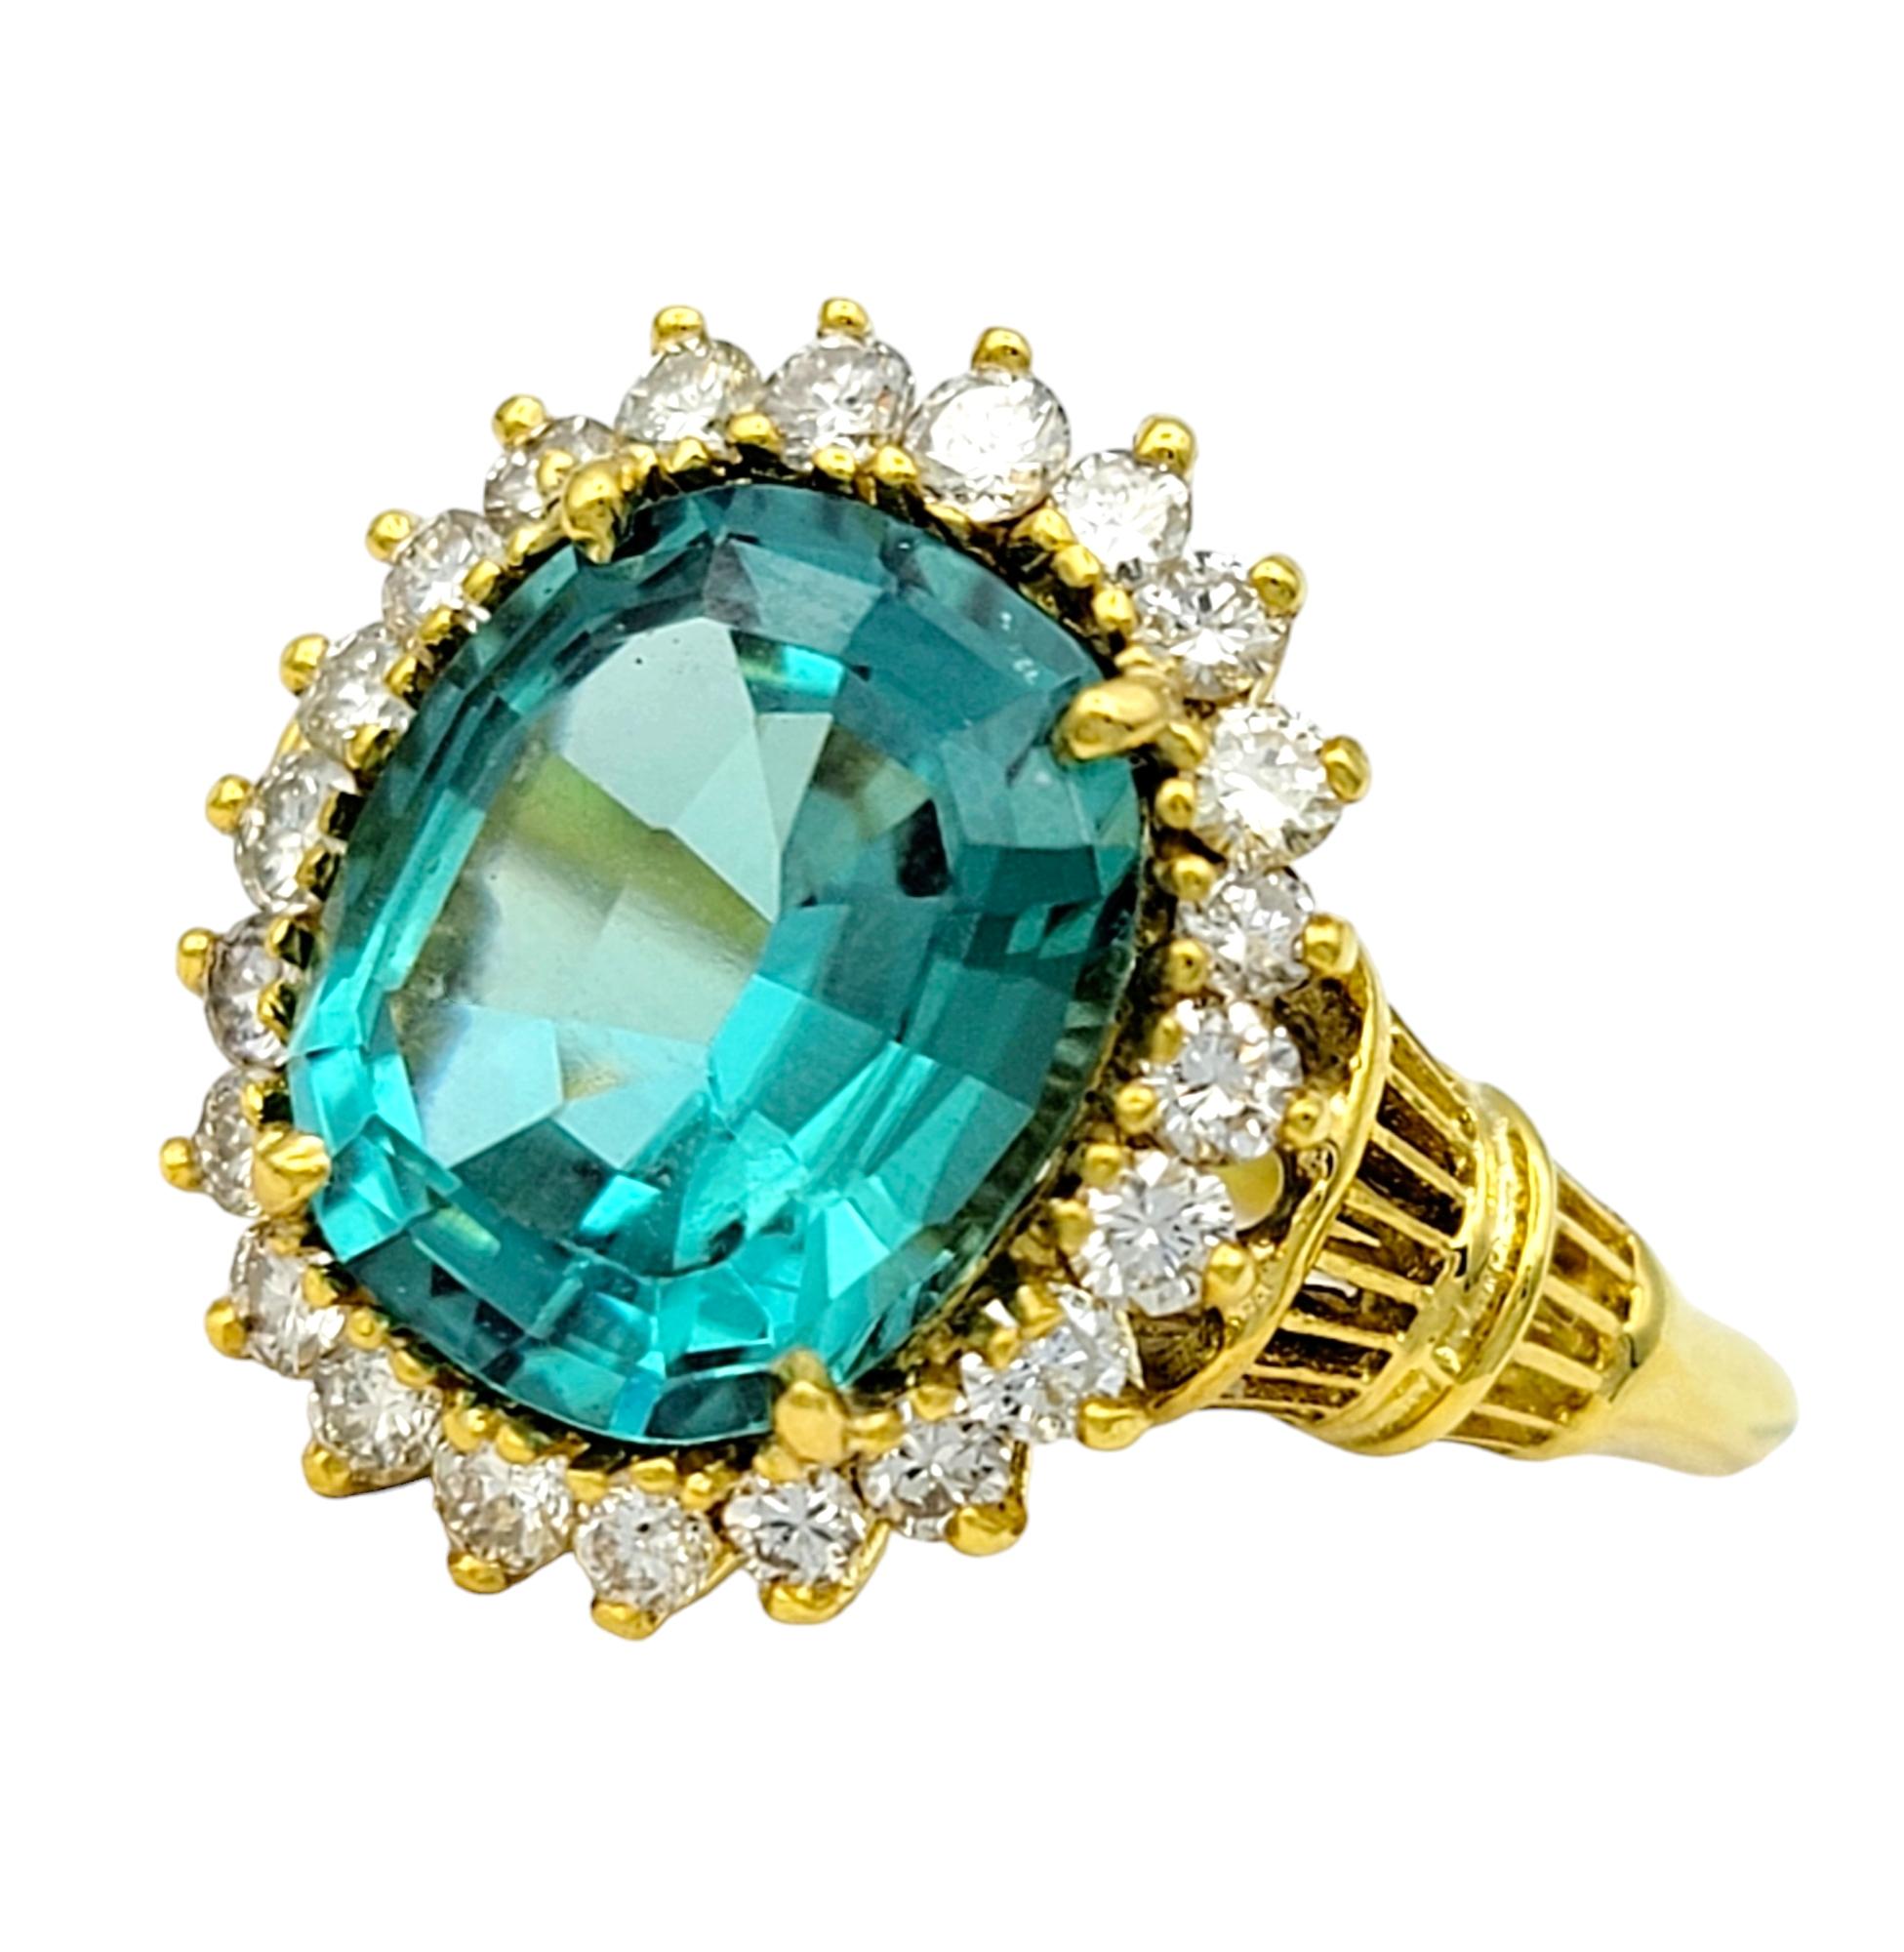 Contemporary Rare 3.0 Carat Oval Cut Indicolite Tourmaline Ring with Diamond Halo in 18K Gold For Sale